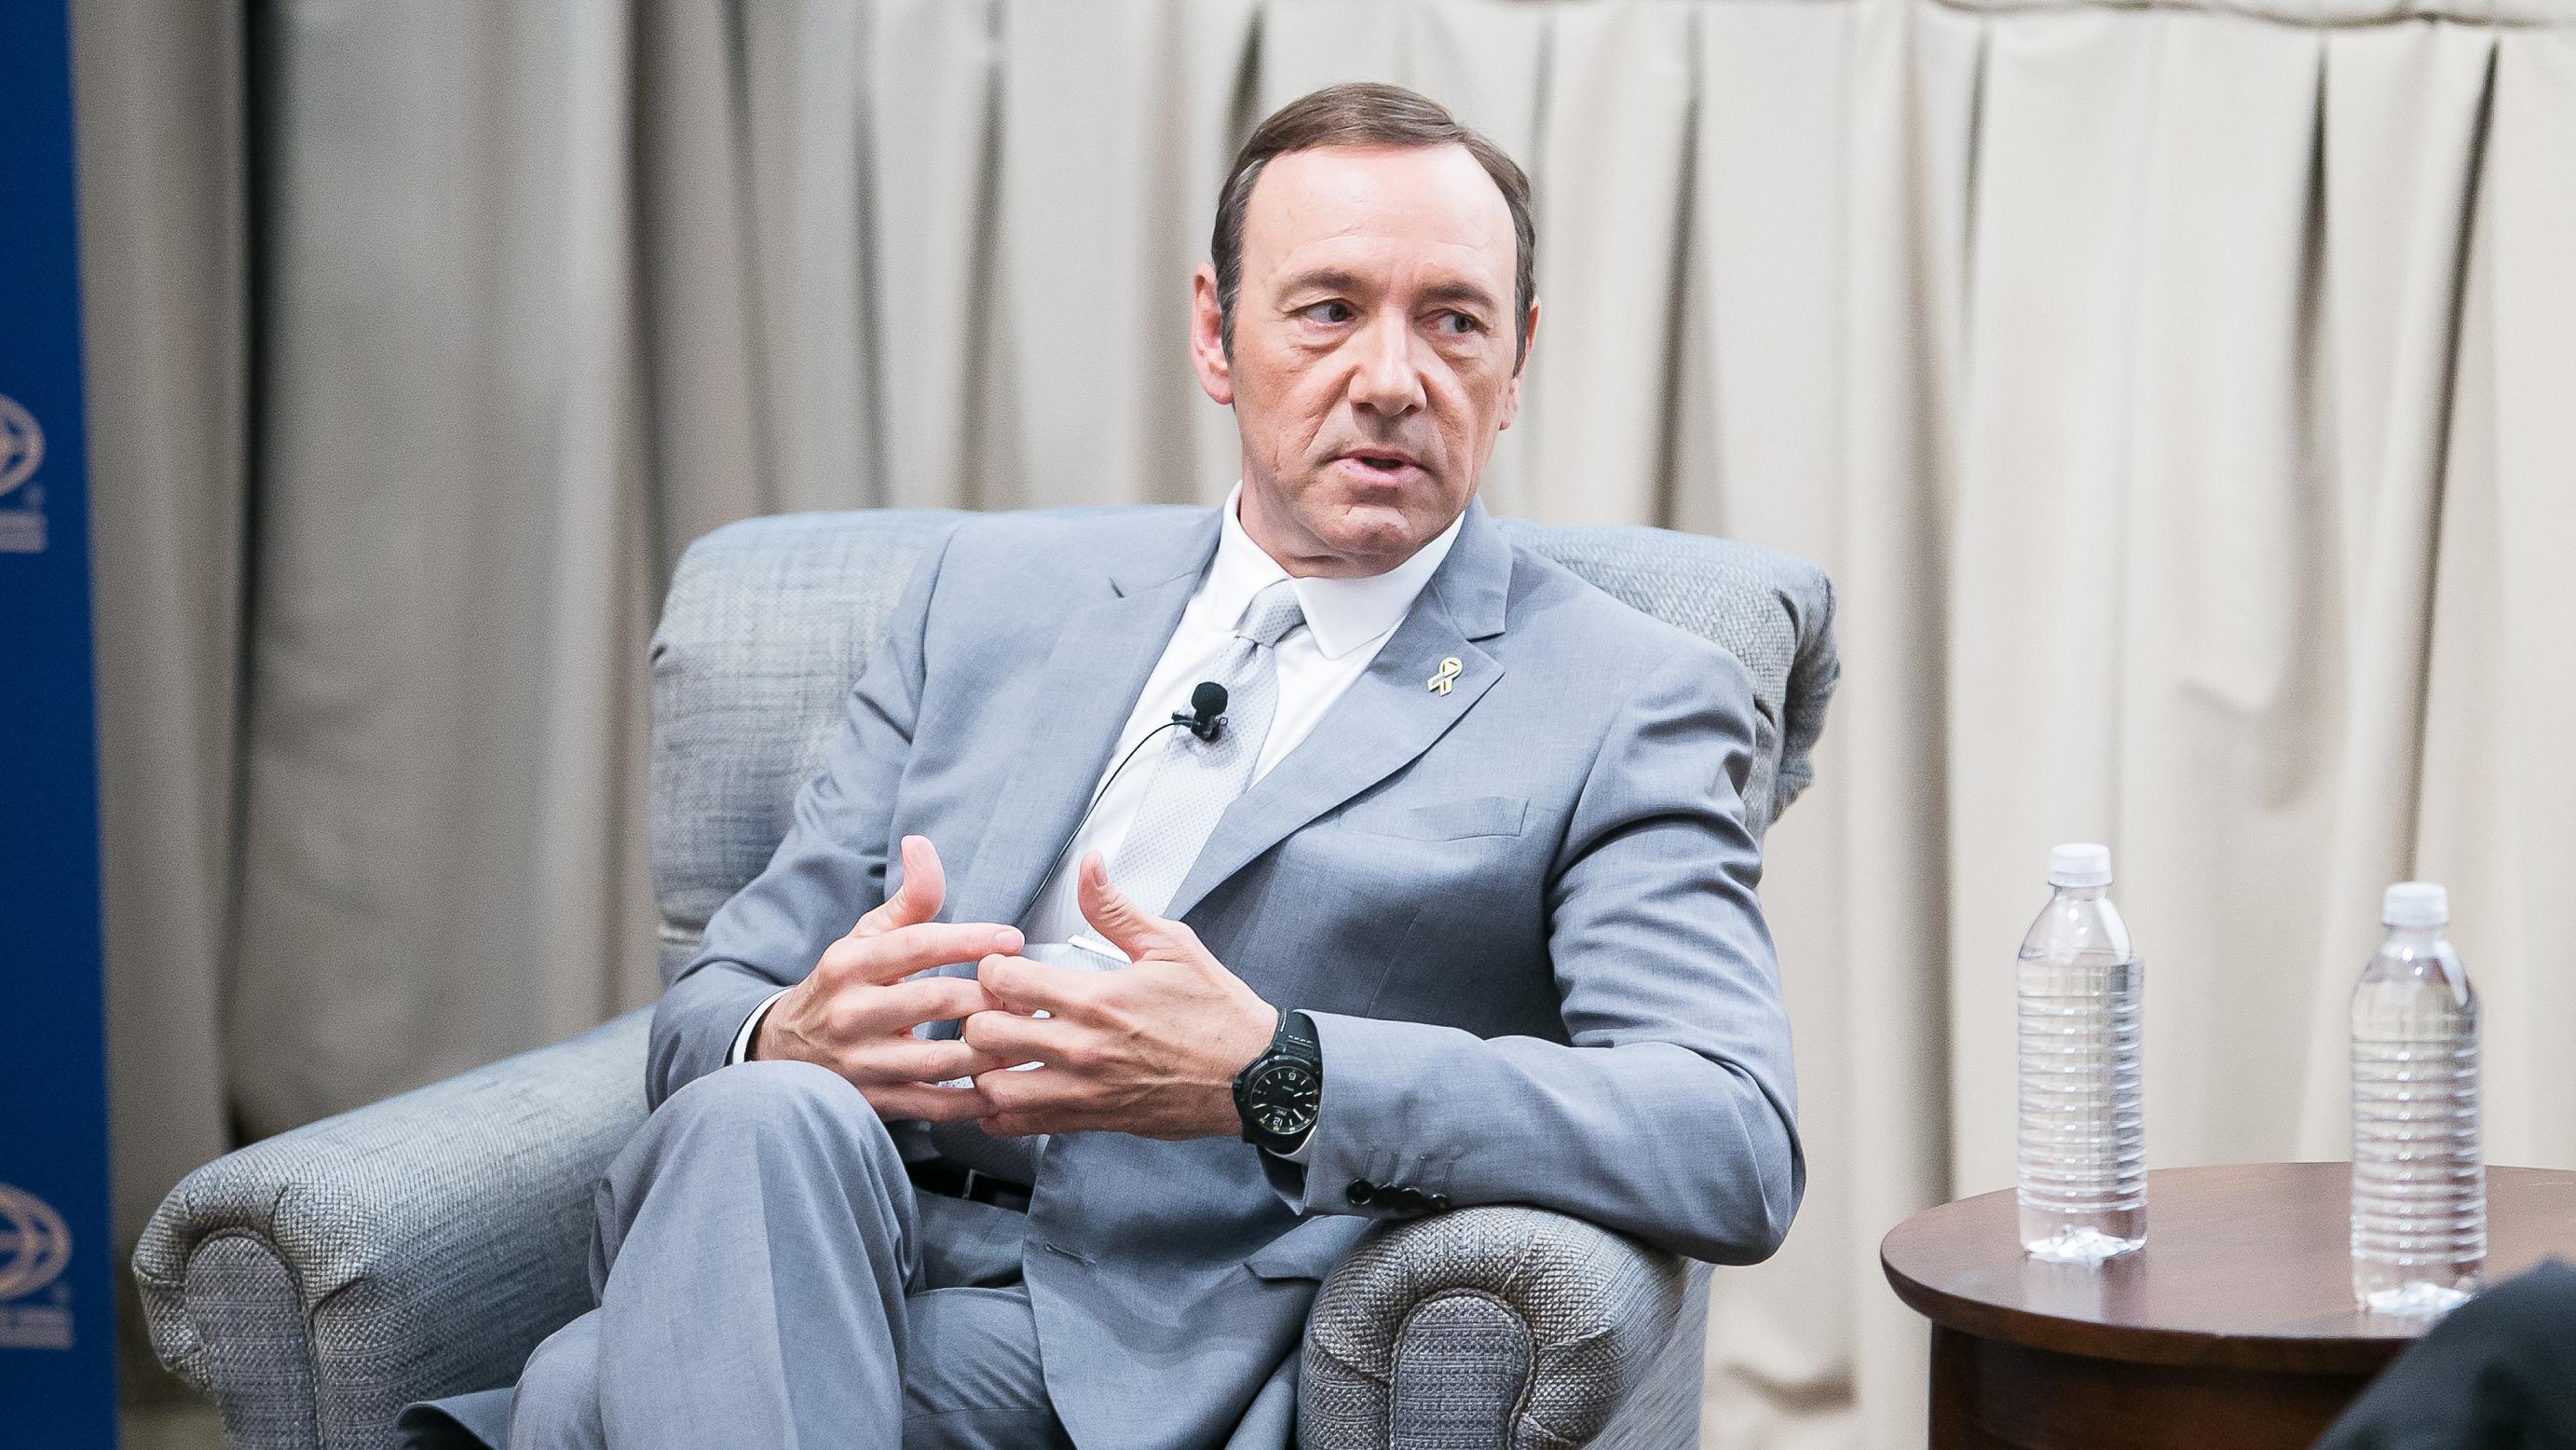 Kevin Spacey HD Image Wallpaper Photos